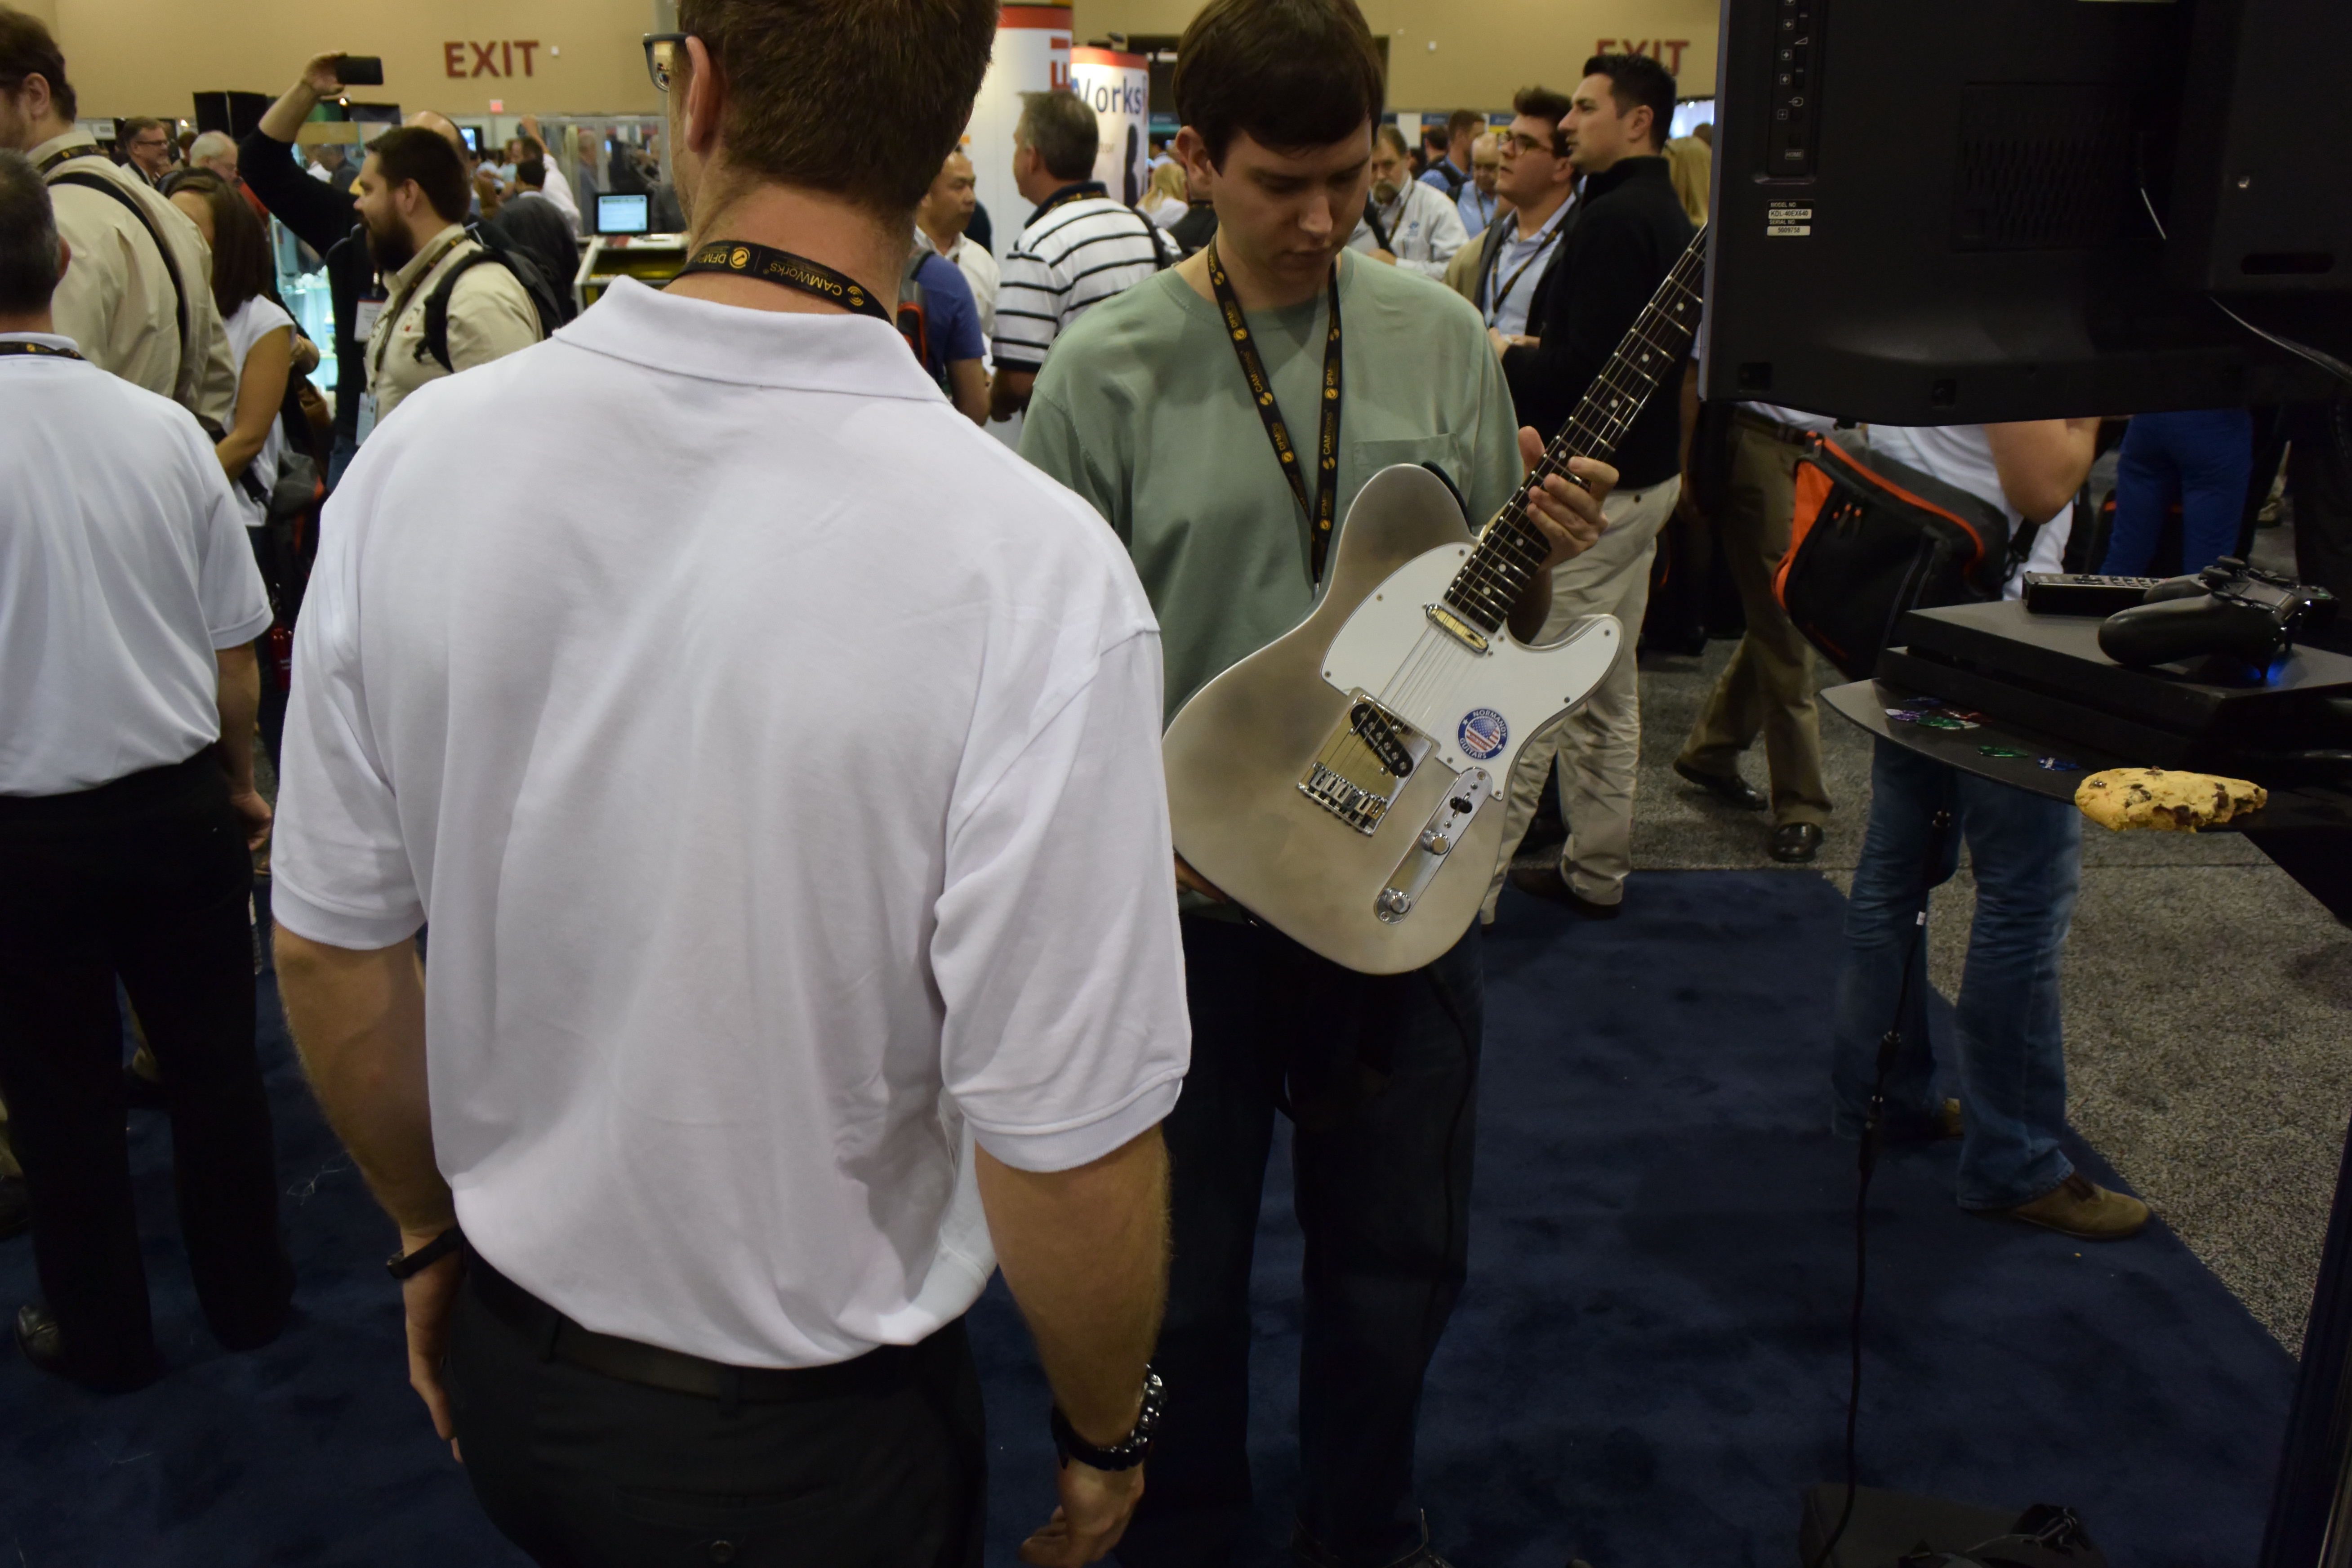 Normandy Guitars at SOLIDWORKS World Product Showcase